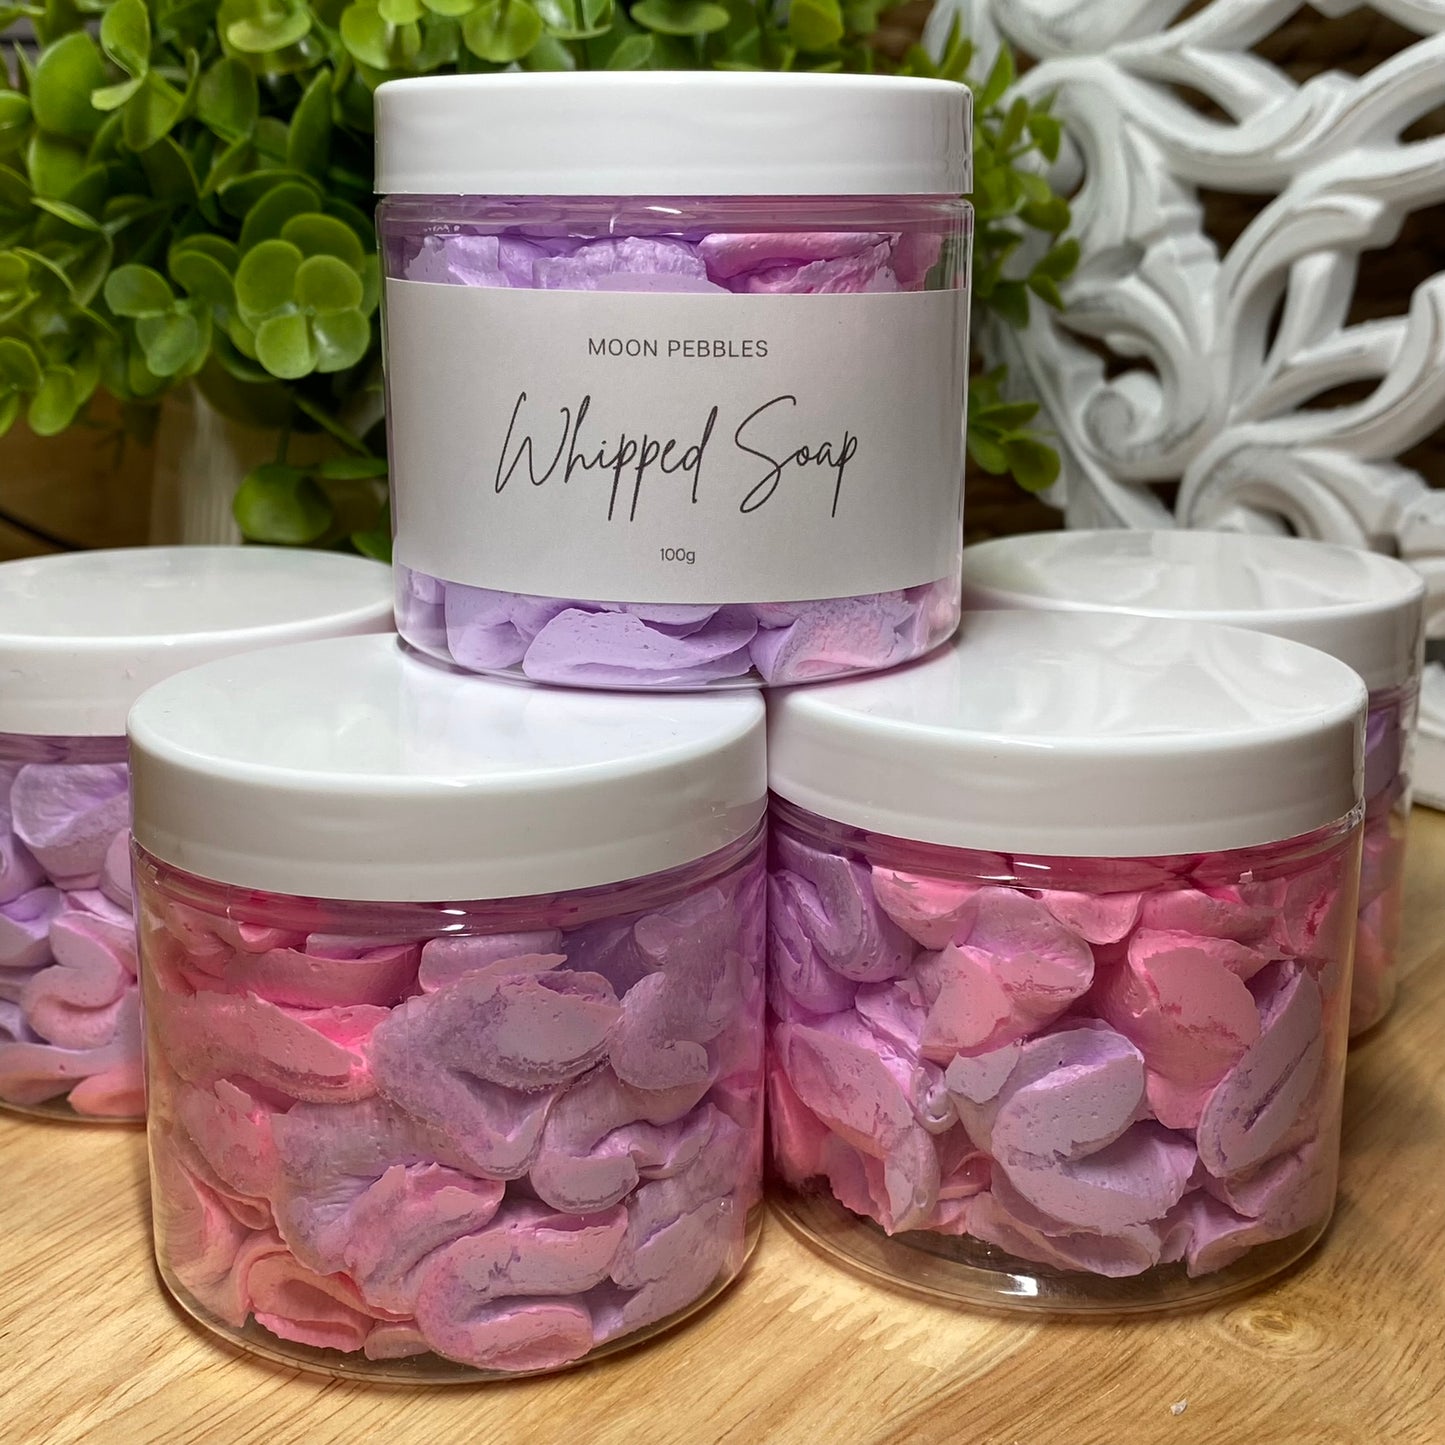 Whipped Soap - Verry Berry